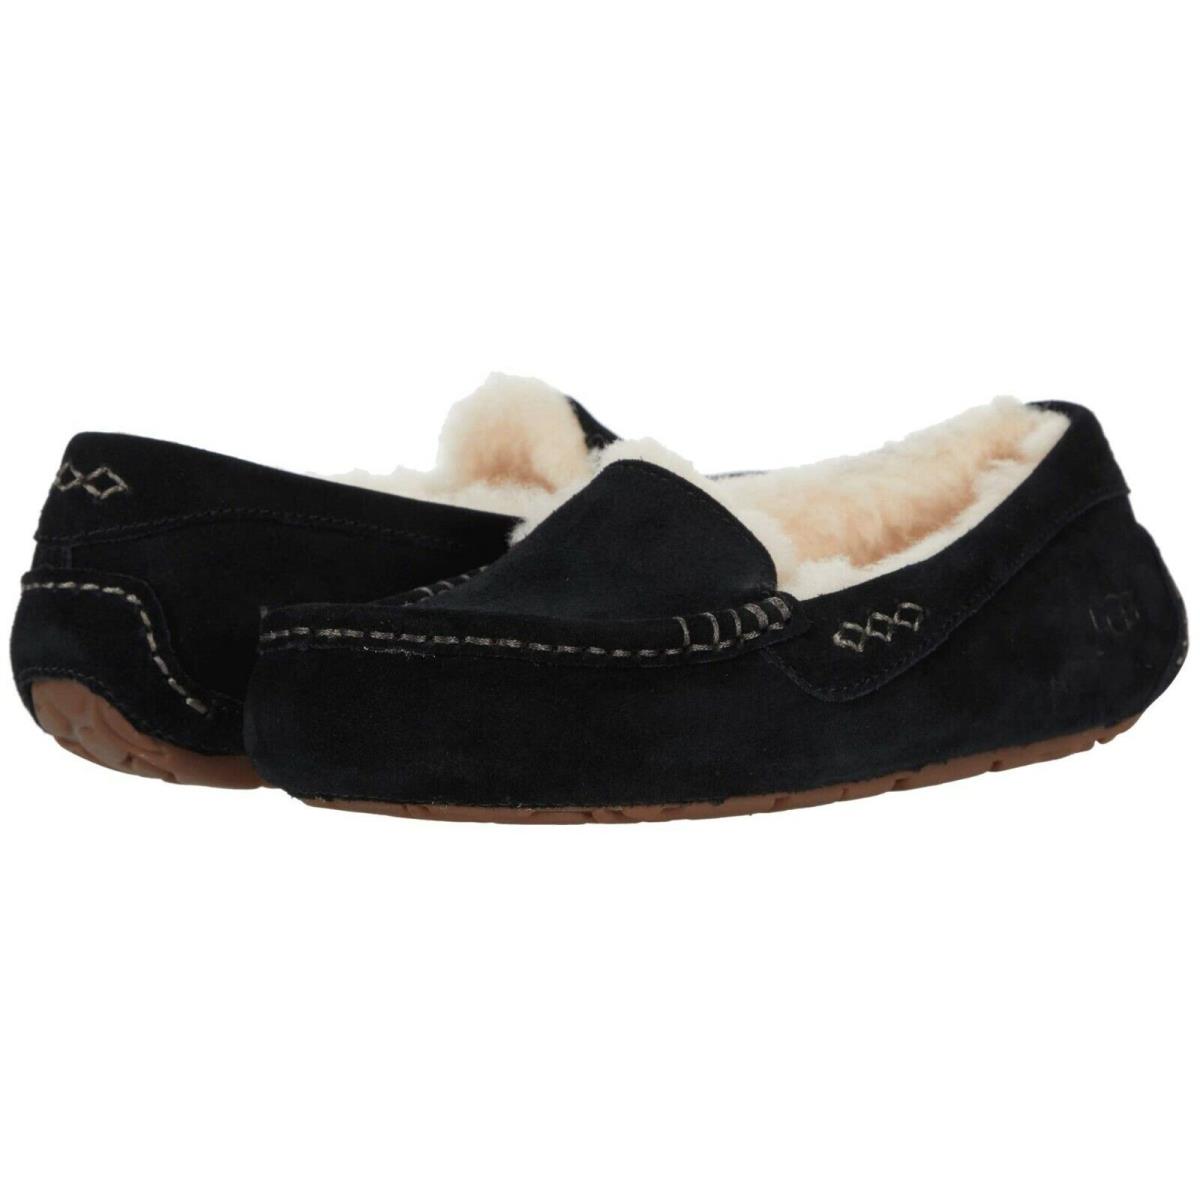 Women`s Shoes Ugg Ansley Wide Suede Moccasin Slippers 1106878 Black